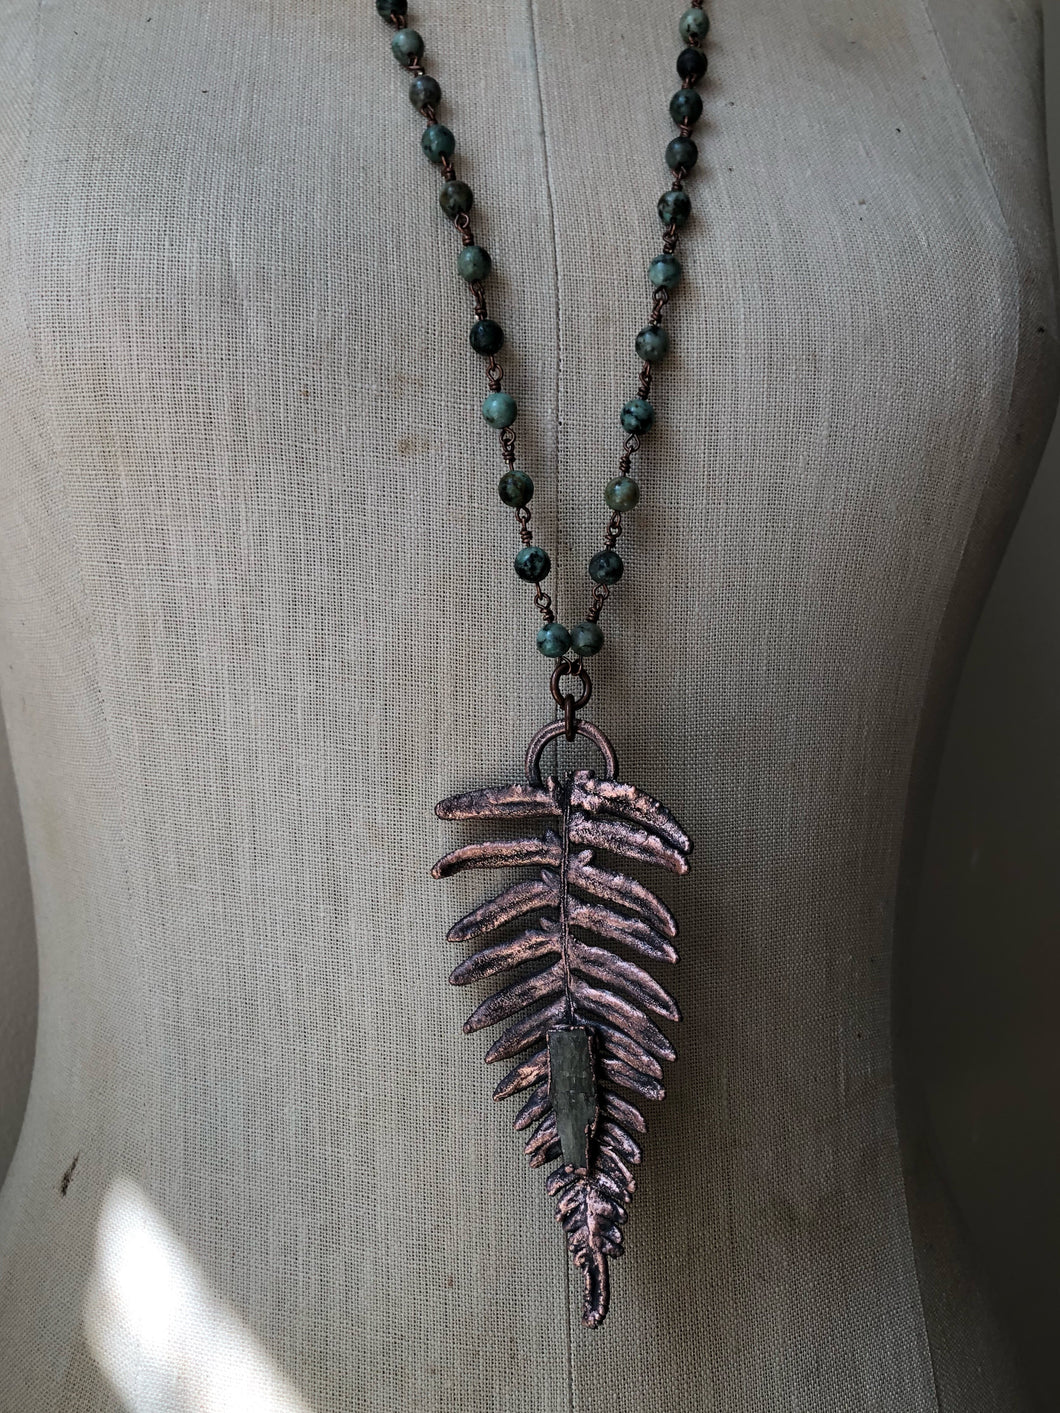 Electroformed Fern with Raw Green Kyanite Necklace #2